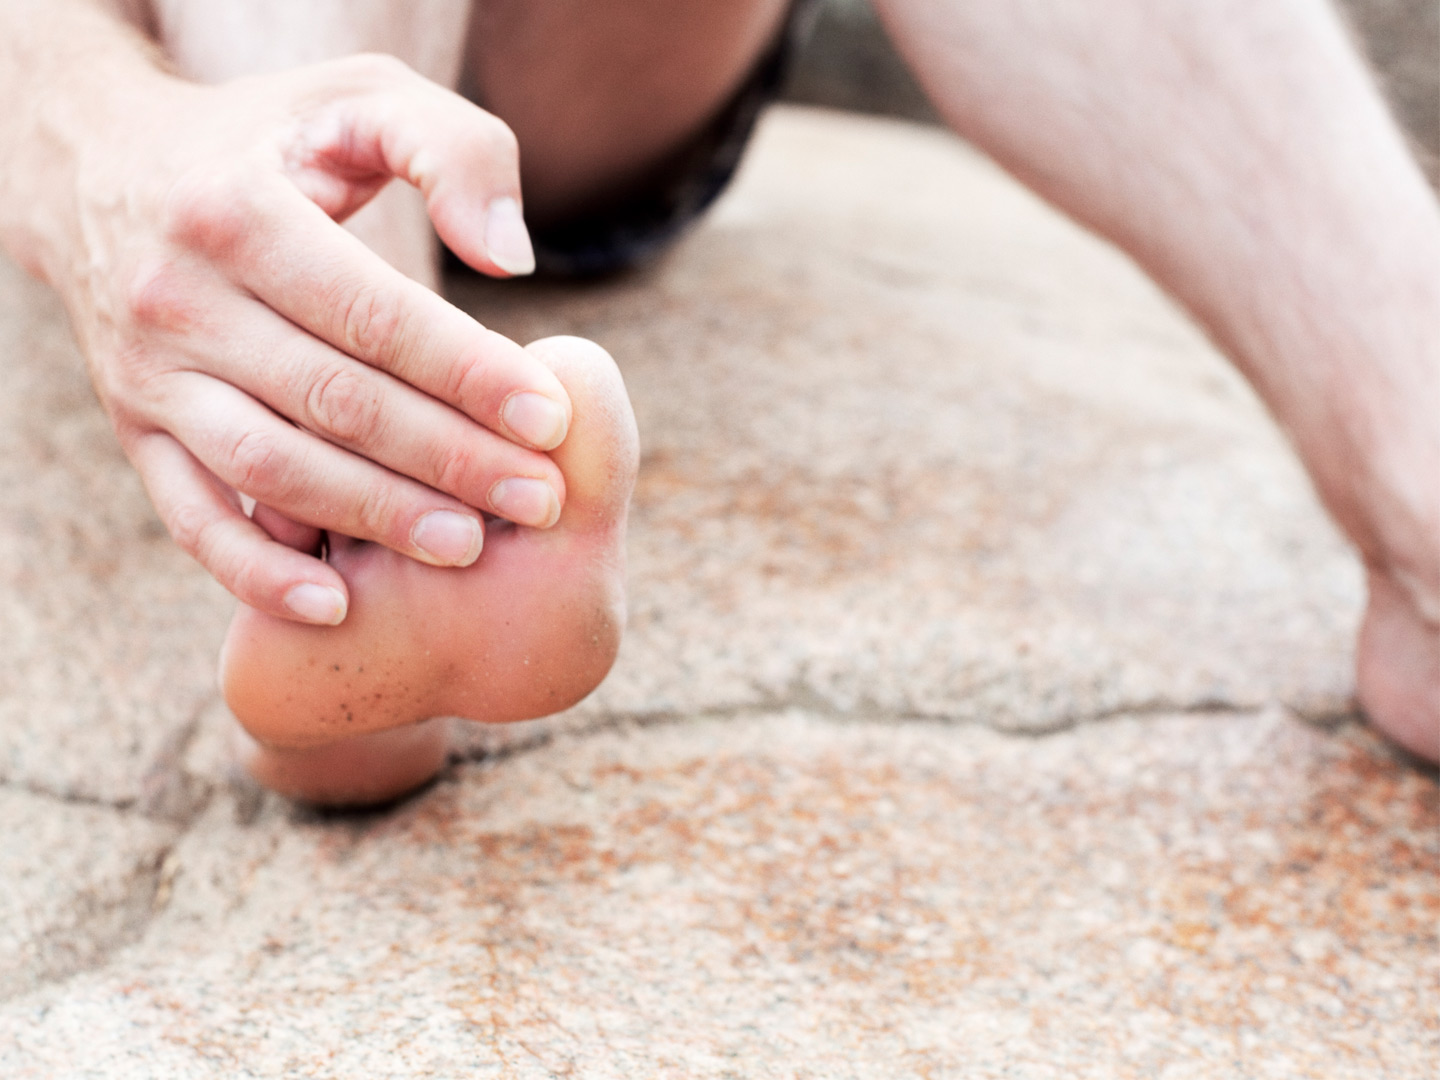 Hammer Toe: Comprehensive Guide - OrthoInfo - AAOS